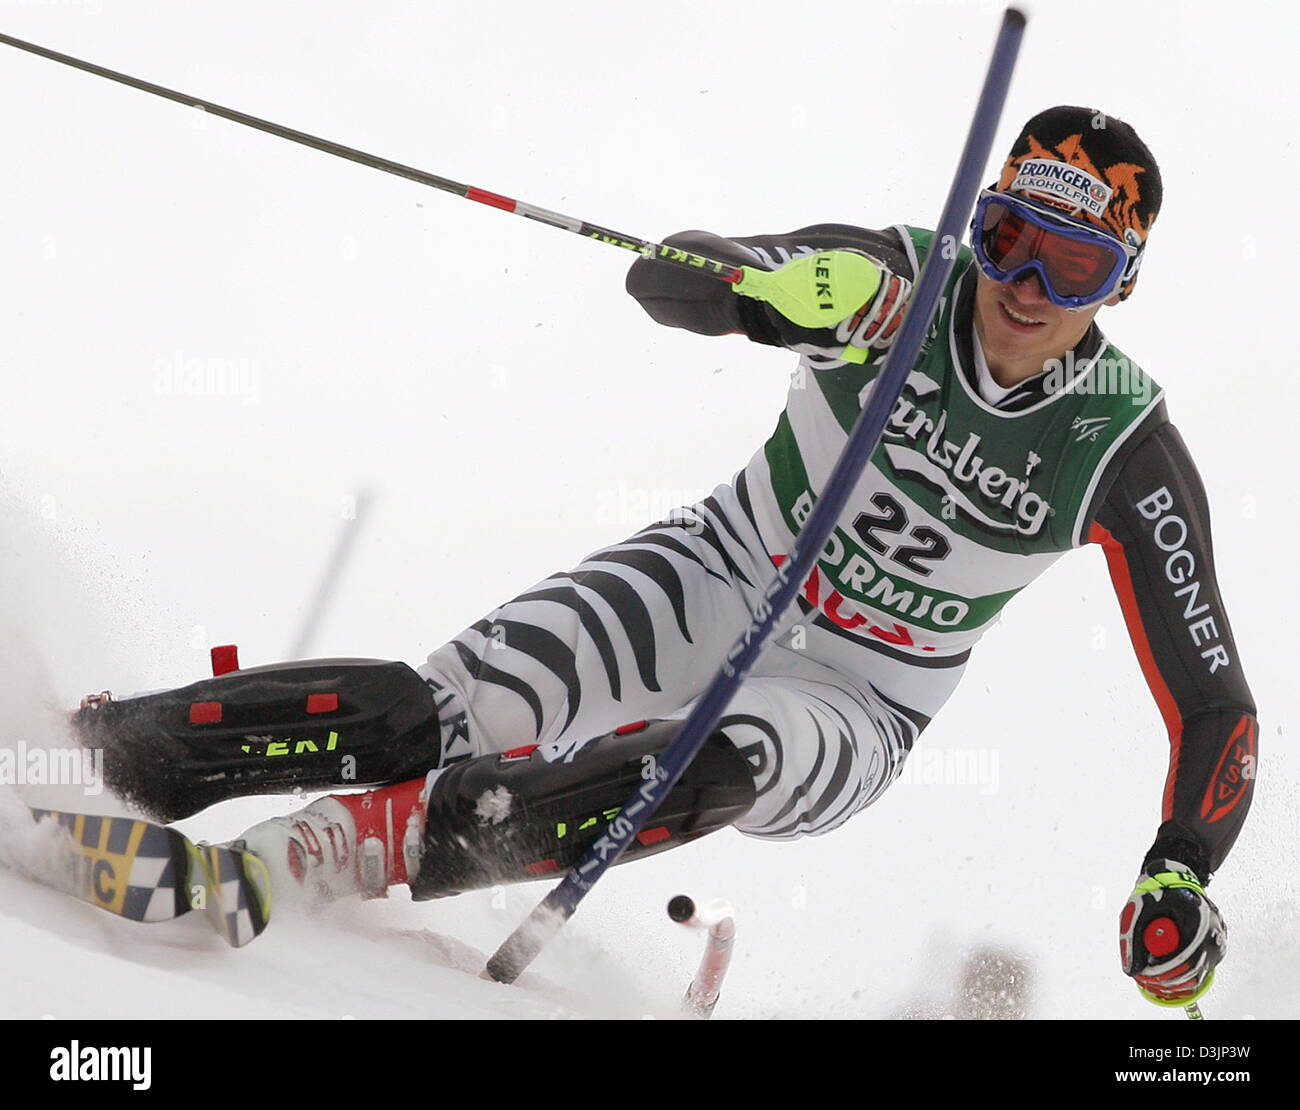 (dpa) - German skier Felix Neureuther races downhill during the Men's Slalom event at the Alpine Skiing World Championships in Bormio, Italy, 12 February 2005. Stock Photo